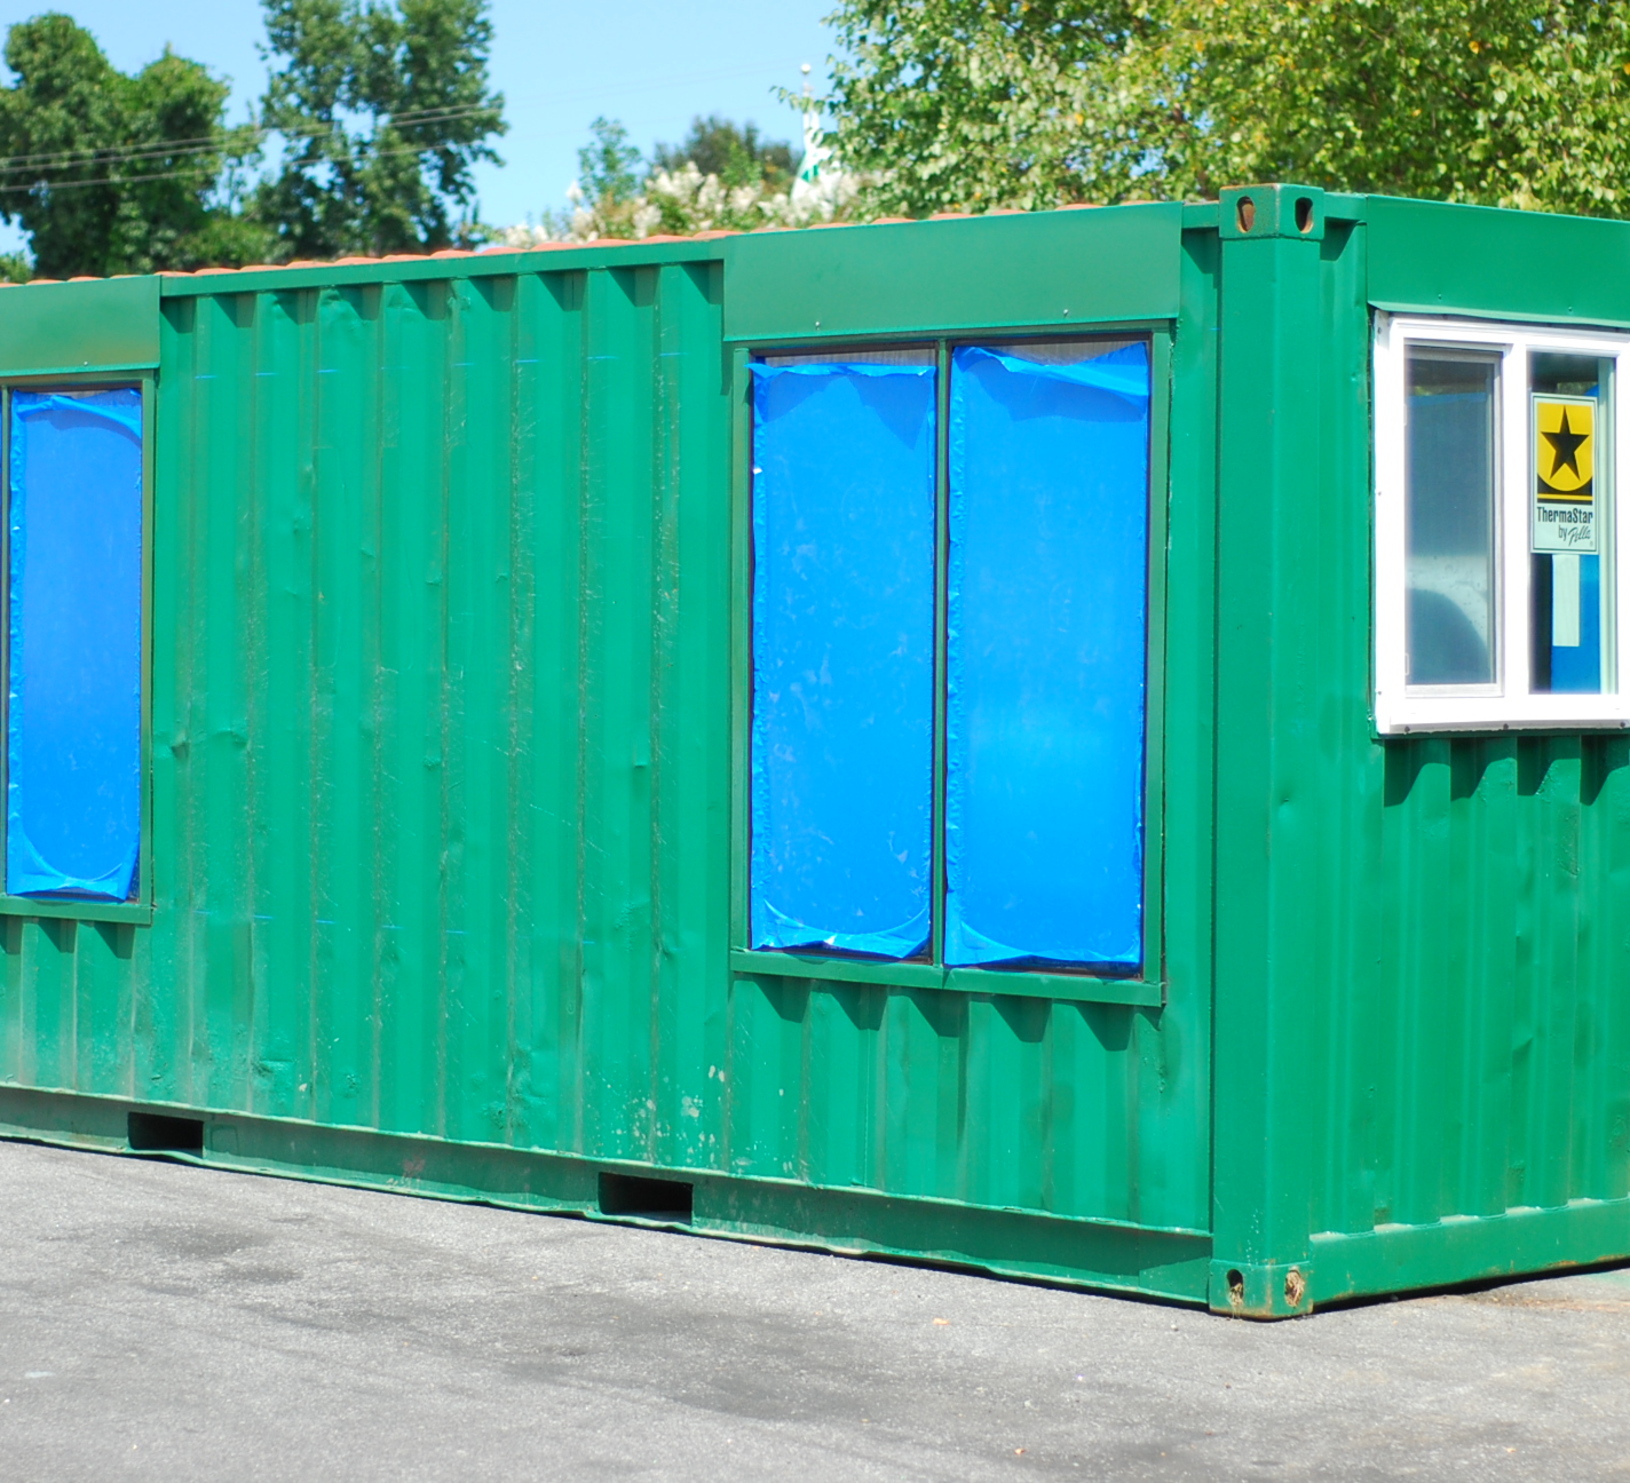 Green custom container with windows for alternative usage